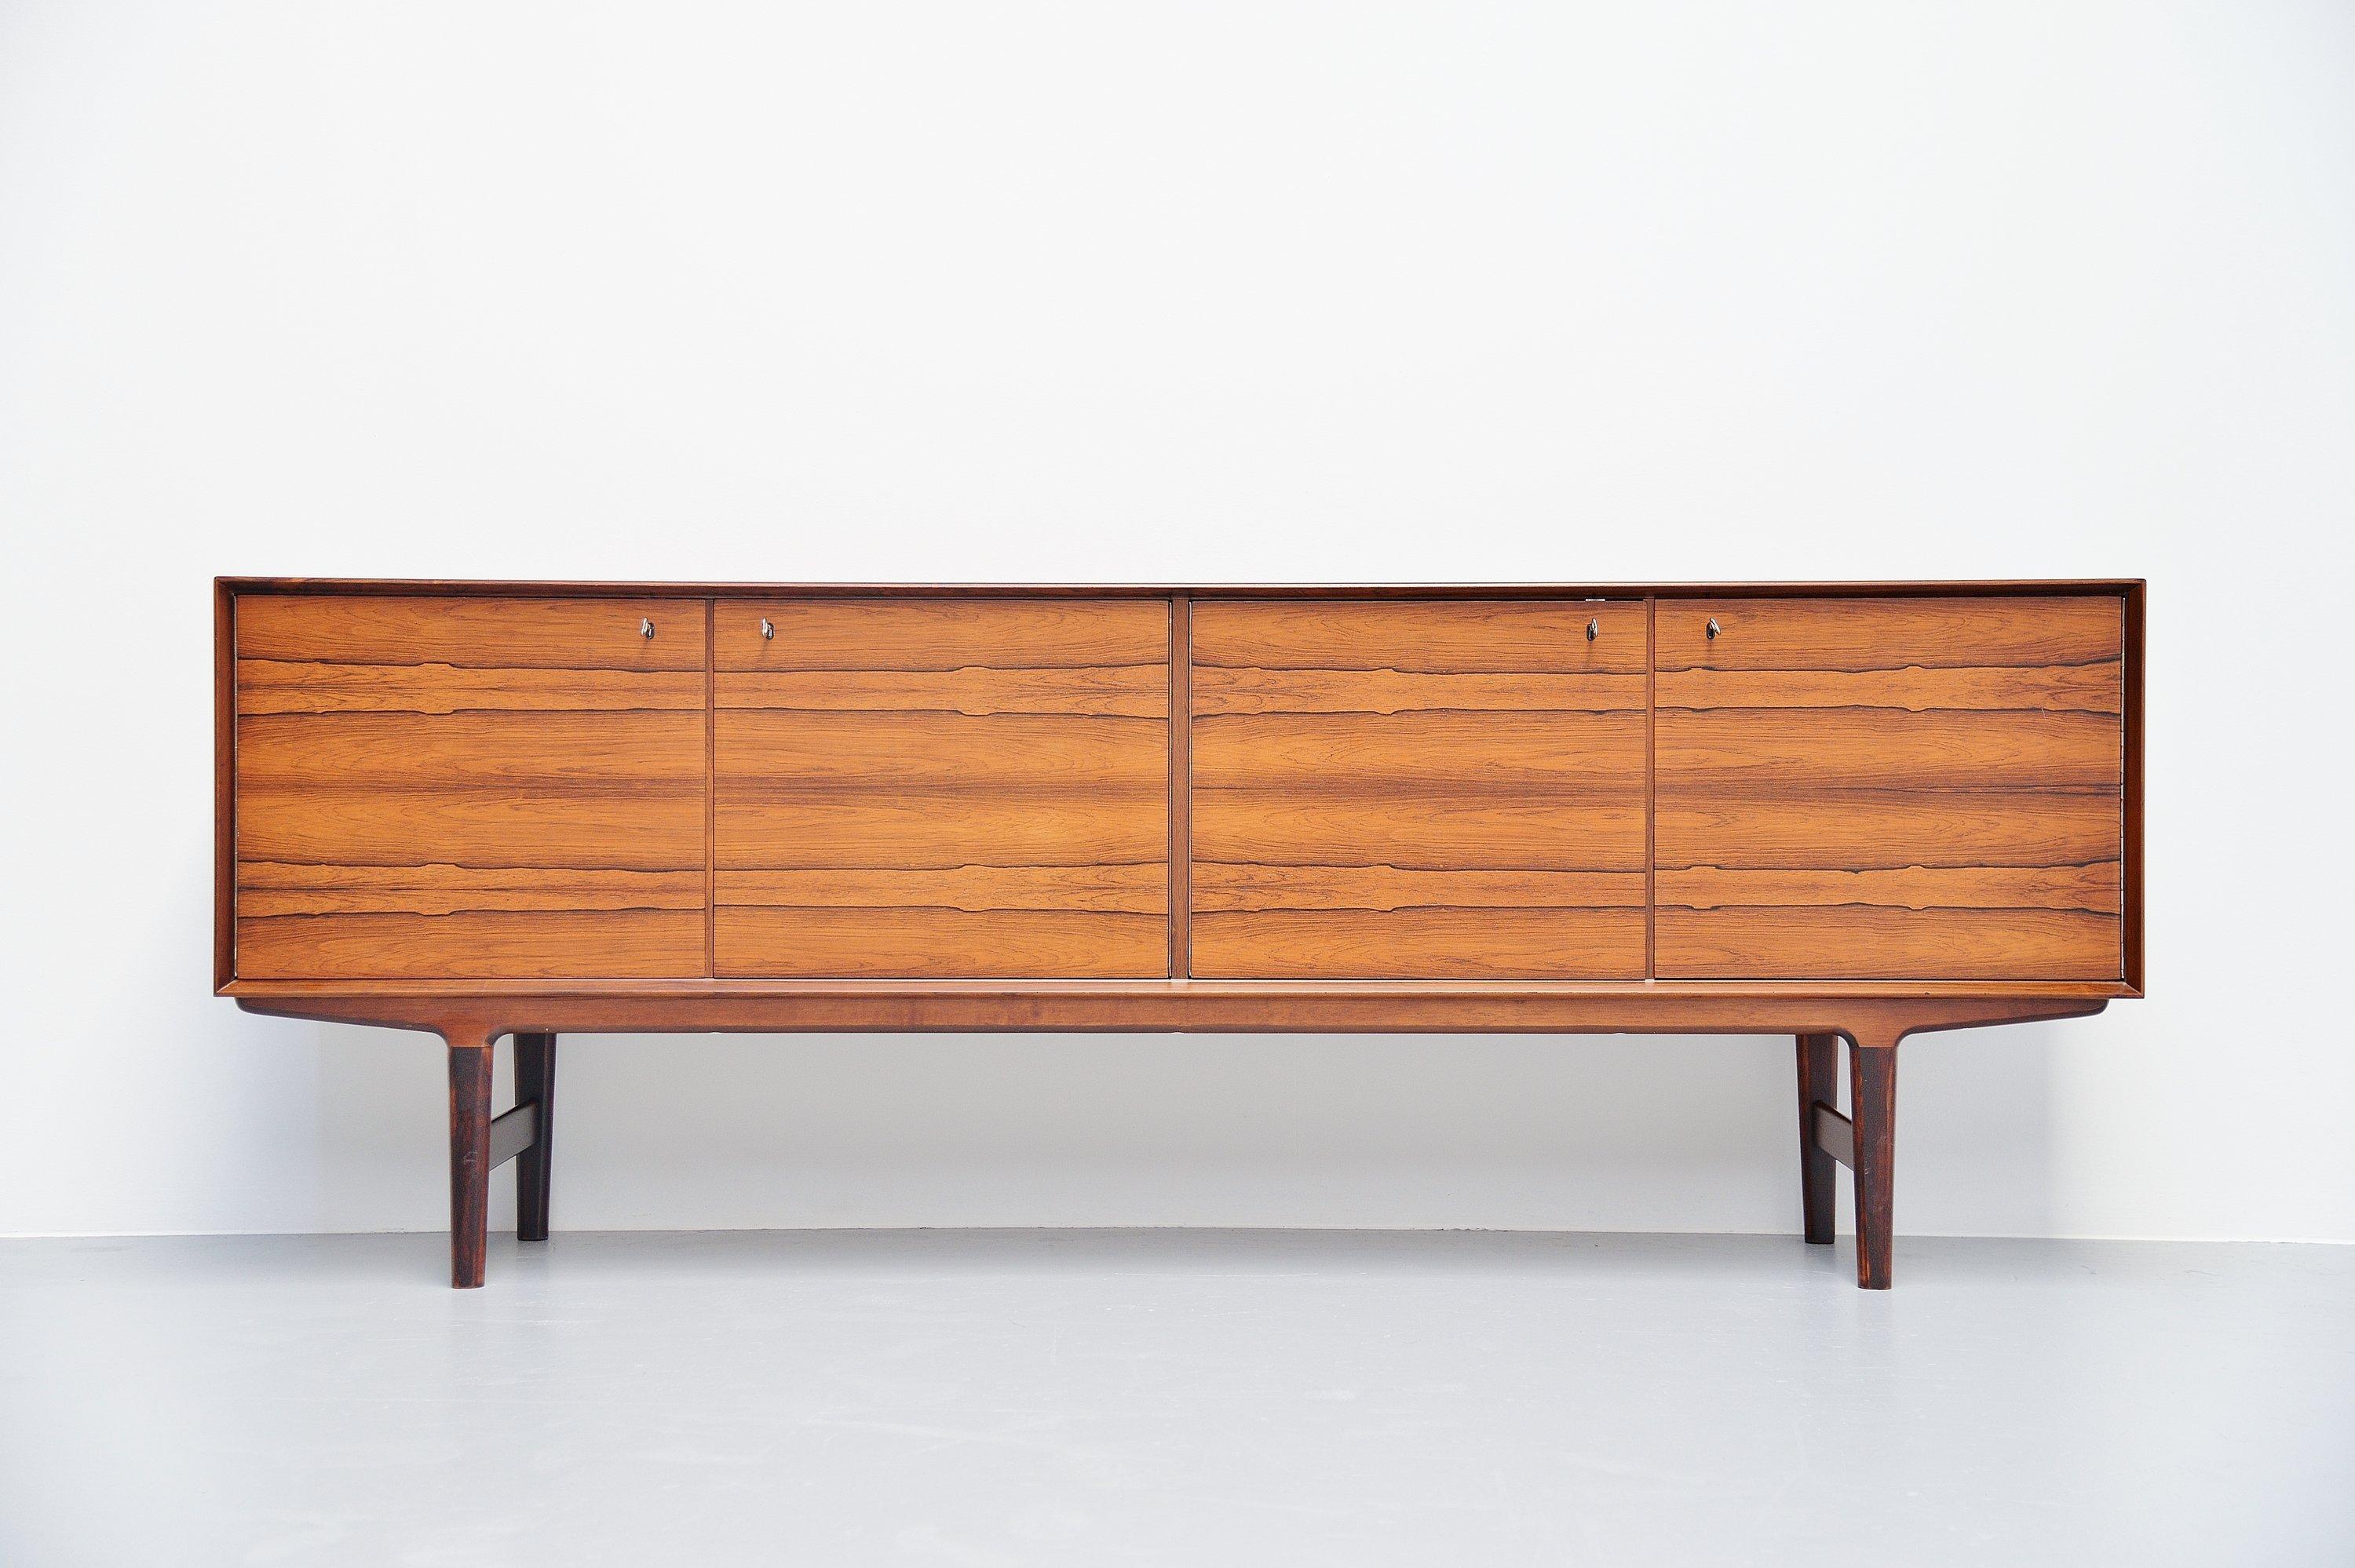 Stunning quality rosewood sideboard designed by Fredrik Kayser and manufactured by Viken, Norway, 1960. Rosewood construction with solid rosewood frame. Sideboard has four folding doors, with shelves and drawers on the inside. This excellent piece